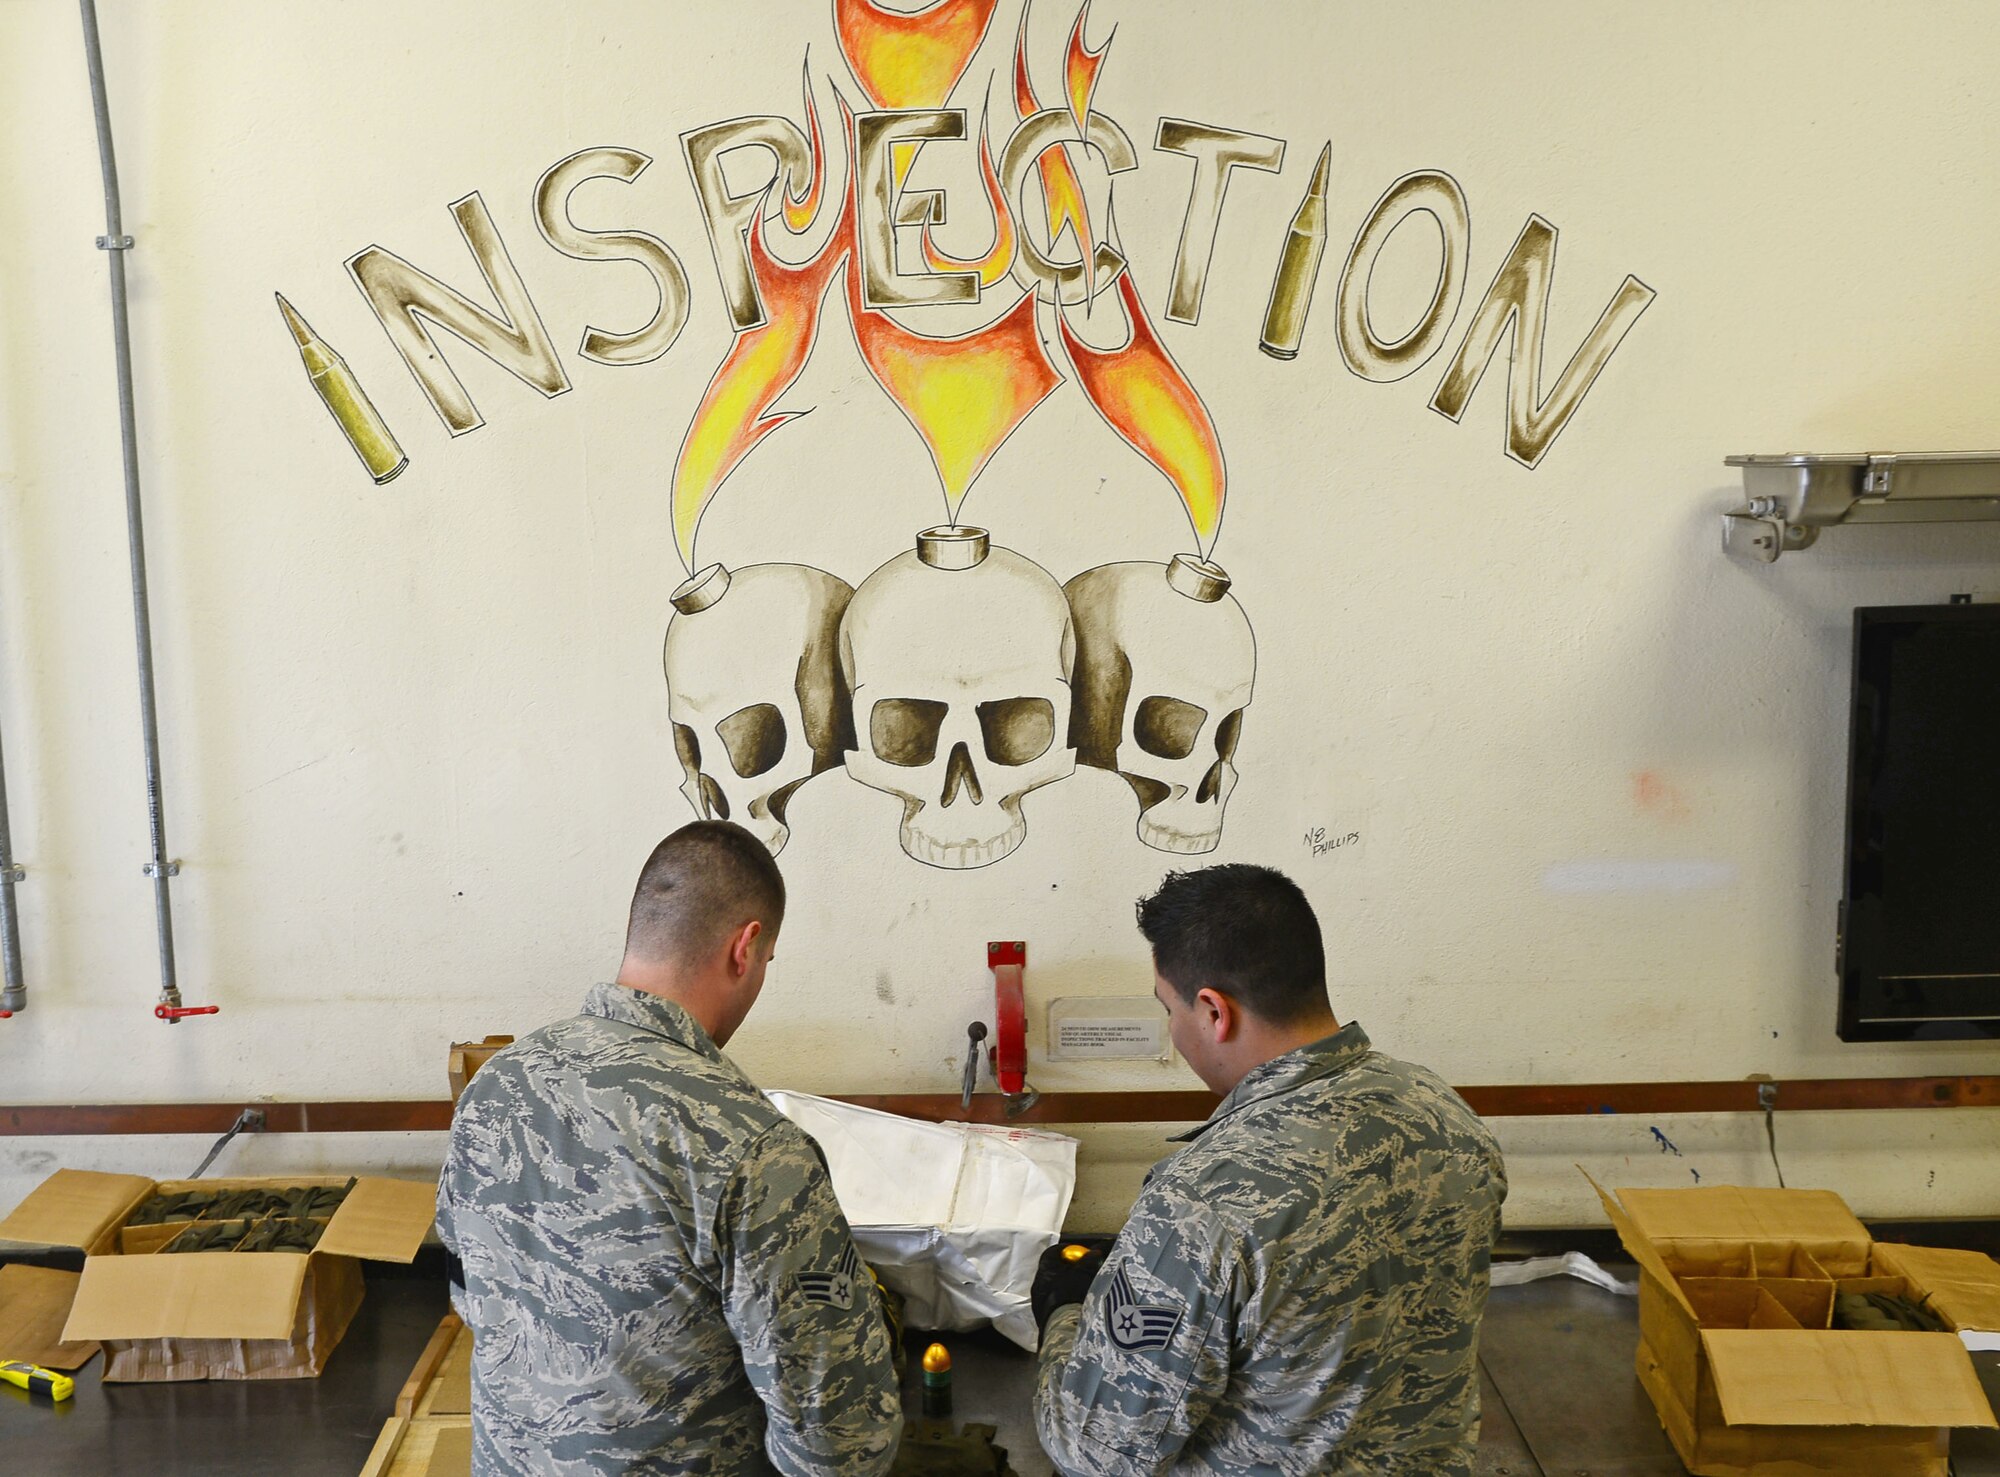 Senior Airman Austin Husome and Staff Sgt. Luis Soto, 31st Munitions Squadron inspectors, perform a quality check on 40 mm HE grenades, Feb. 26, 2013 at Aviano Air Base, Italy. The 31st MUNS is accountable for four different stockpiles of munitions valued at nearly $800 million. (U.S. Air Force photo/Airman 1st Class Matthew Lotz)